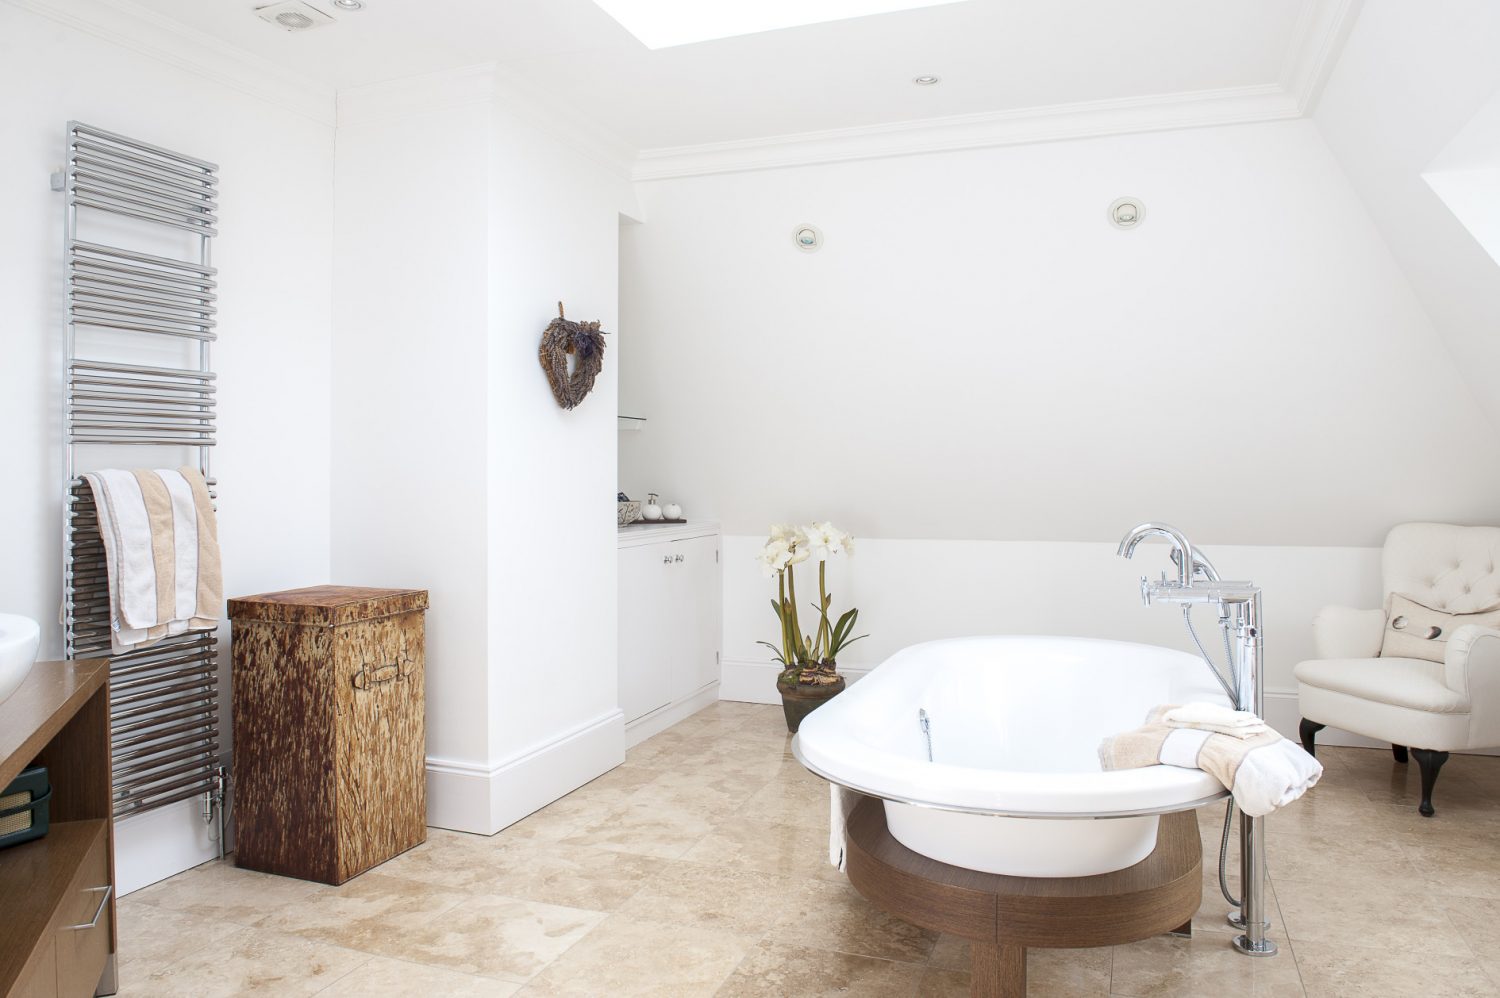 Helena and Julian wanted to be able to lie in the bath and gaze up at the stars, so positioned the double-ended bath under a central skylight window. Underfloor heating and a large heated towel rail keep this generous bathroom warm, even in the depths of winter